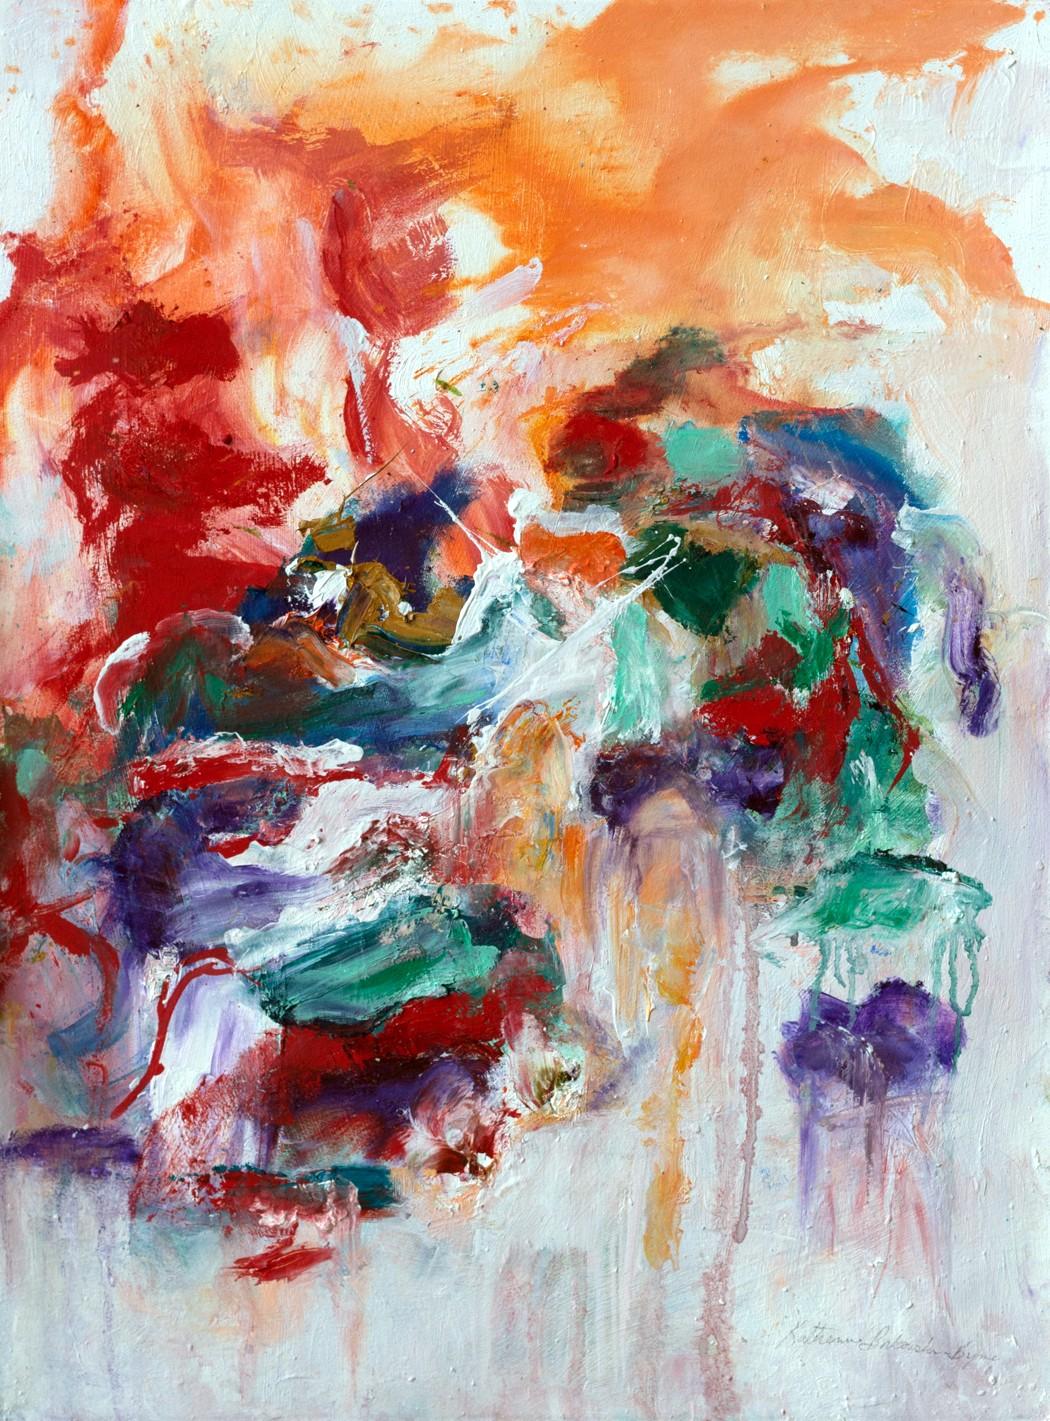 "My Little Hearth", abstract, red, orange, purple, blue, white, oil painting - Painting by Katherine Borkowski-Byrne